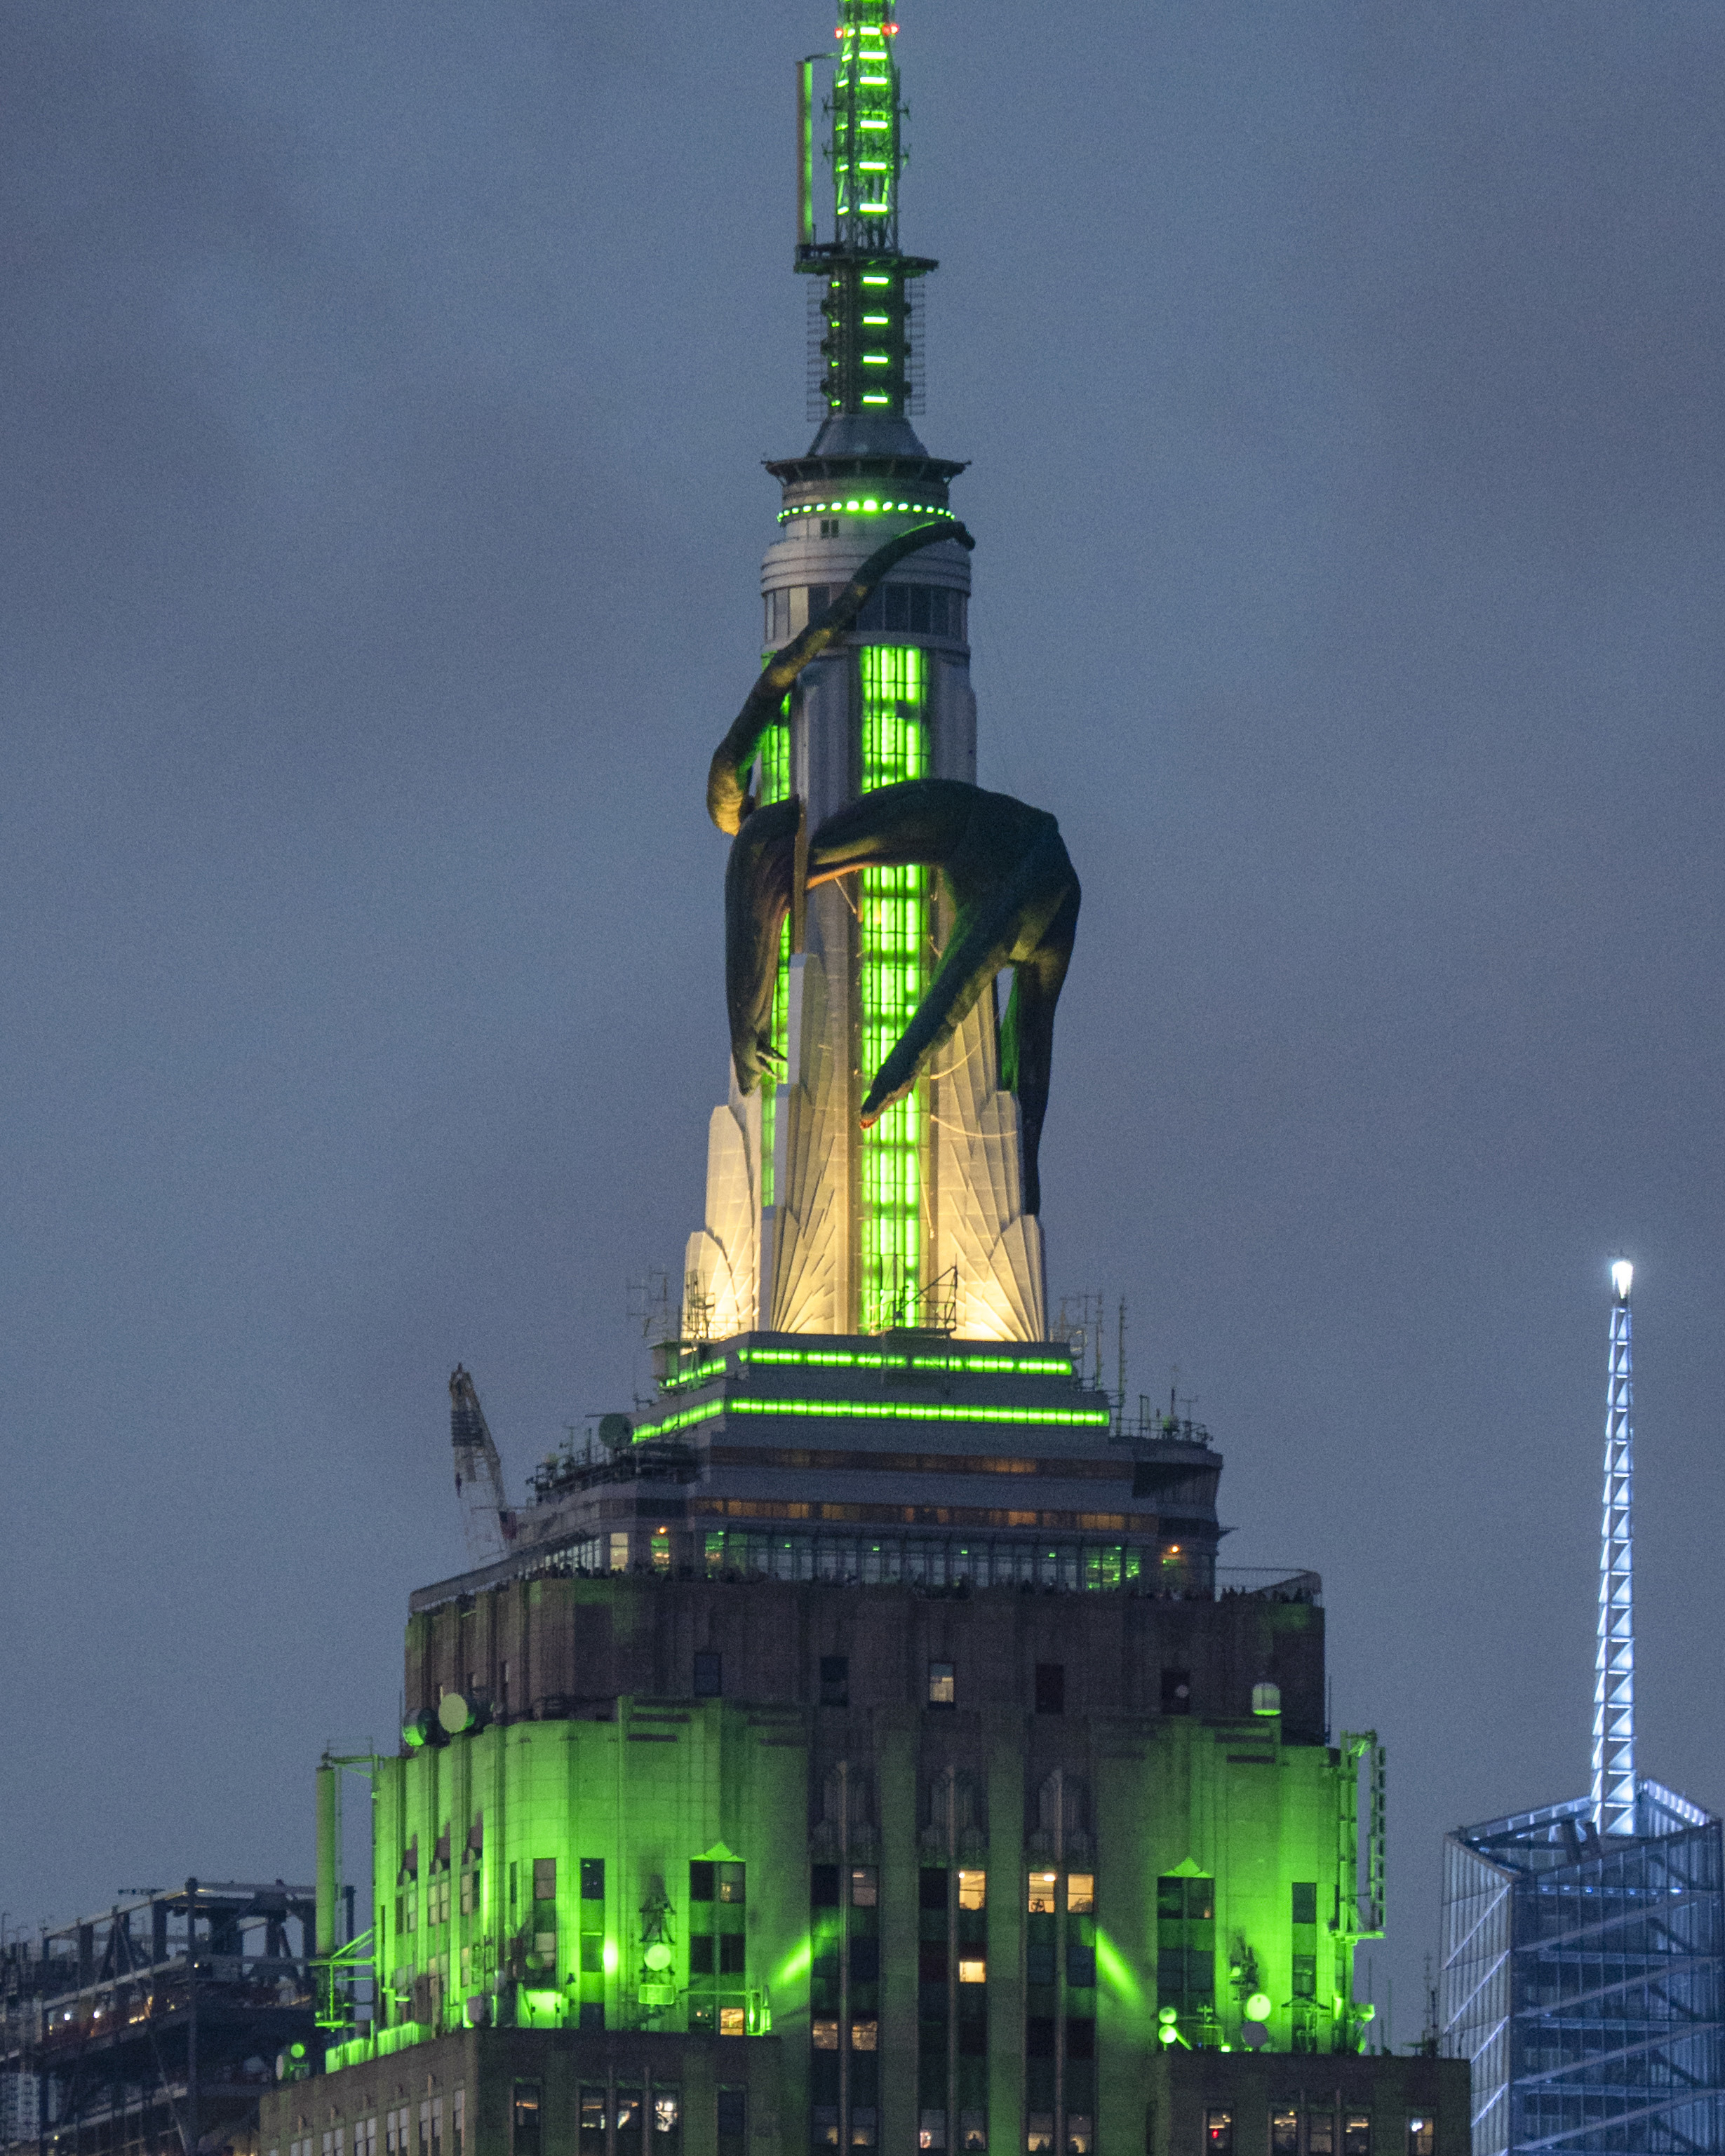 An image of the Empire State Building in New York City with a green glow and a gorilla display wrapped around the top, reminiscent of King Kong